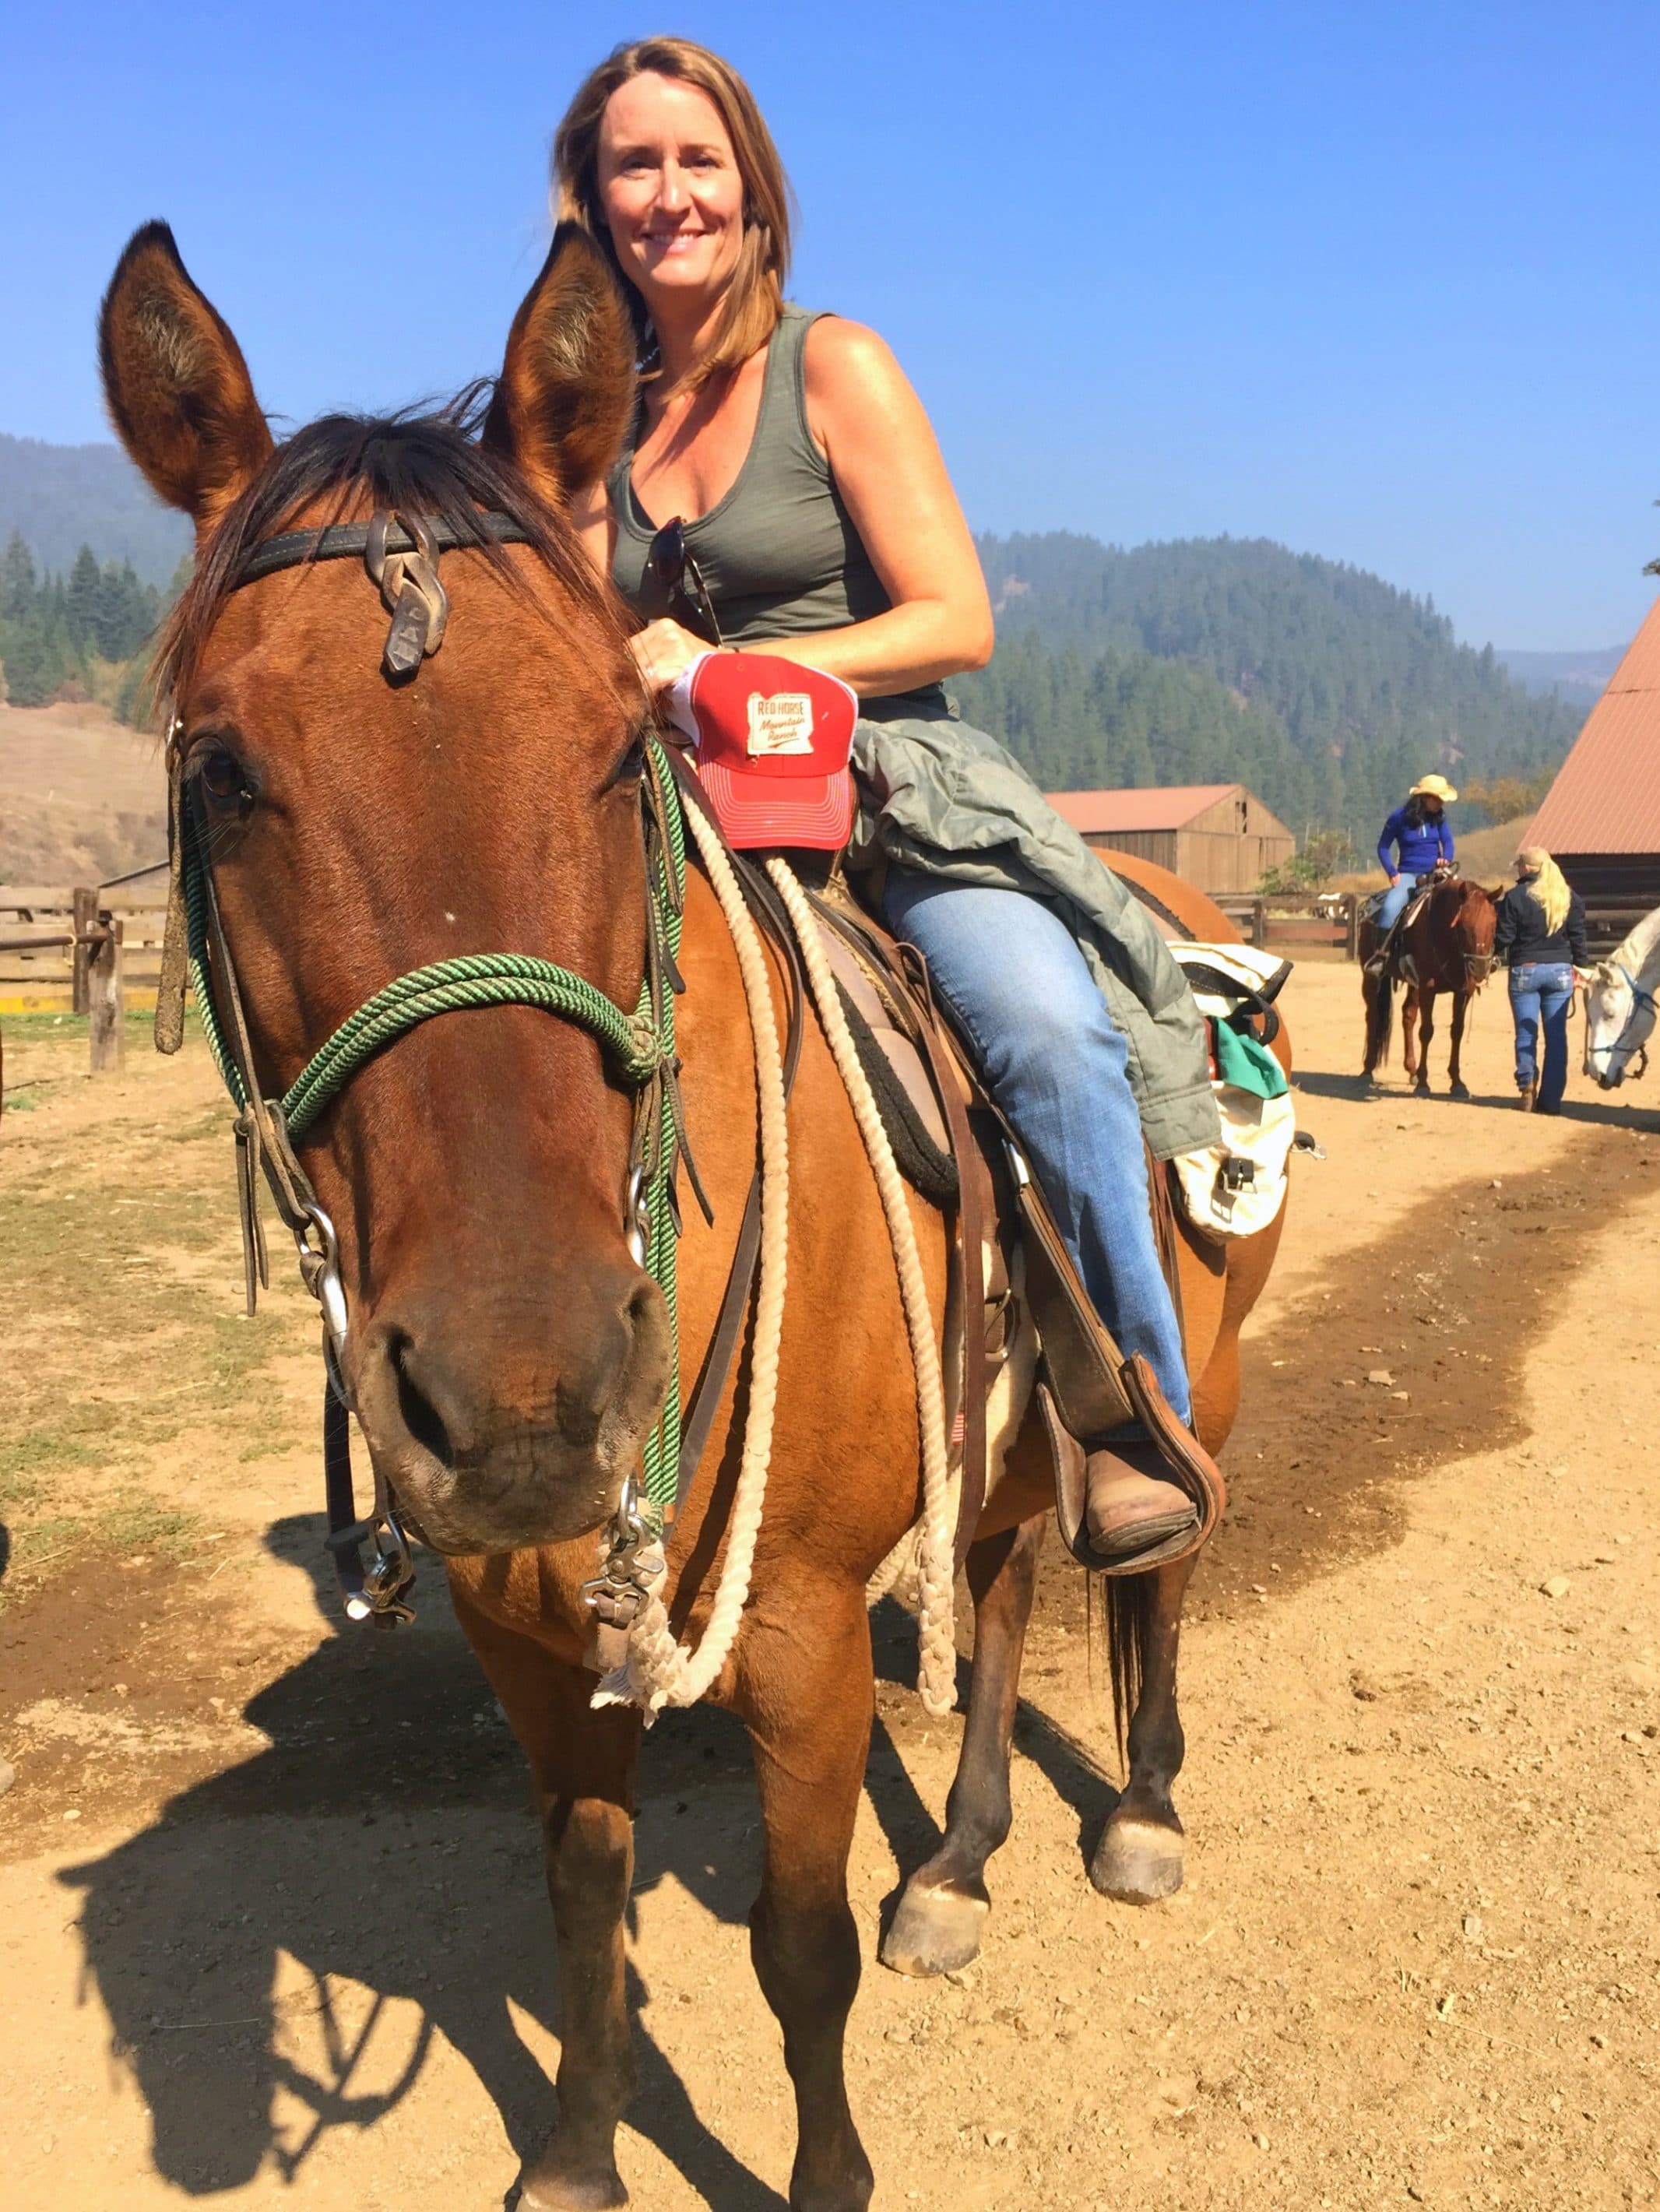 Guests enjoy daily horseback riding lessons and trail rides at Red Horse Mountain Ranch.